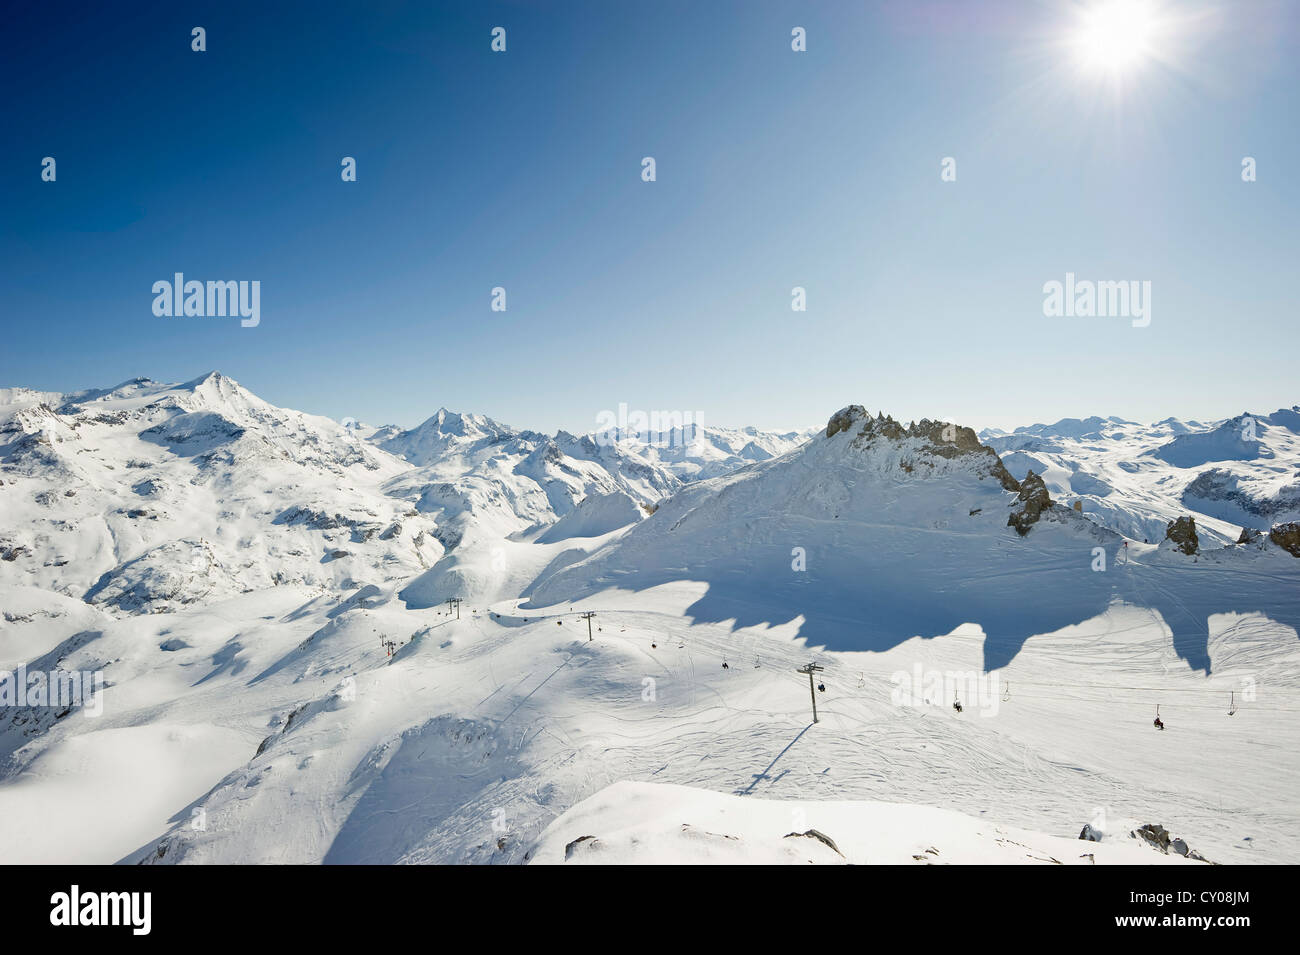 Snow-covered mountain landscape, Tignes, Val d'Isere, Savoie, Alps, France, Europe Stock Photo